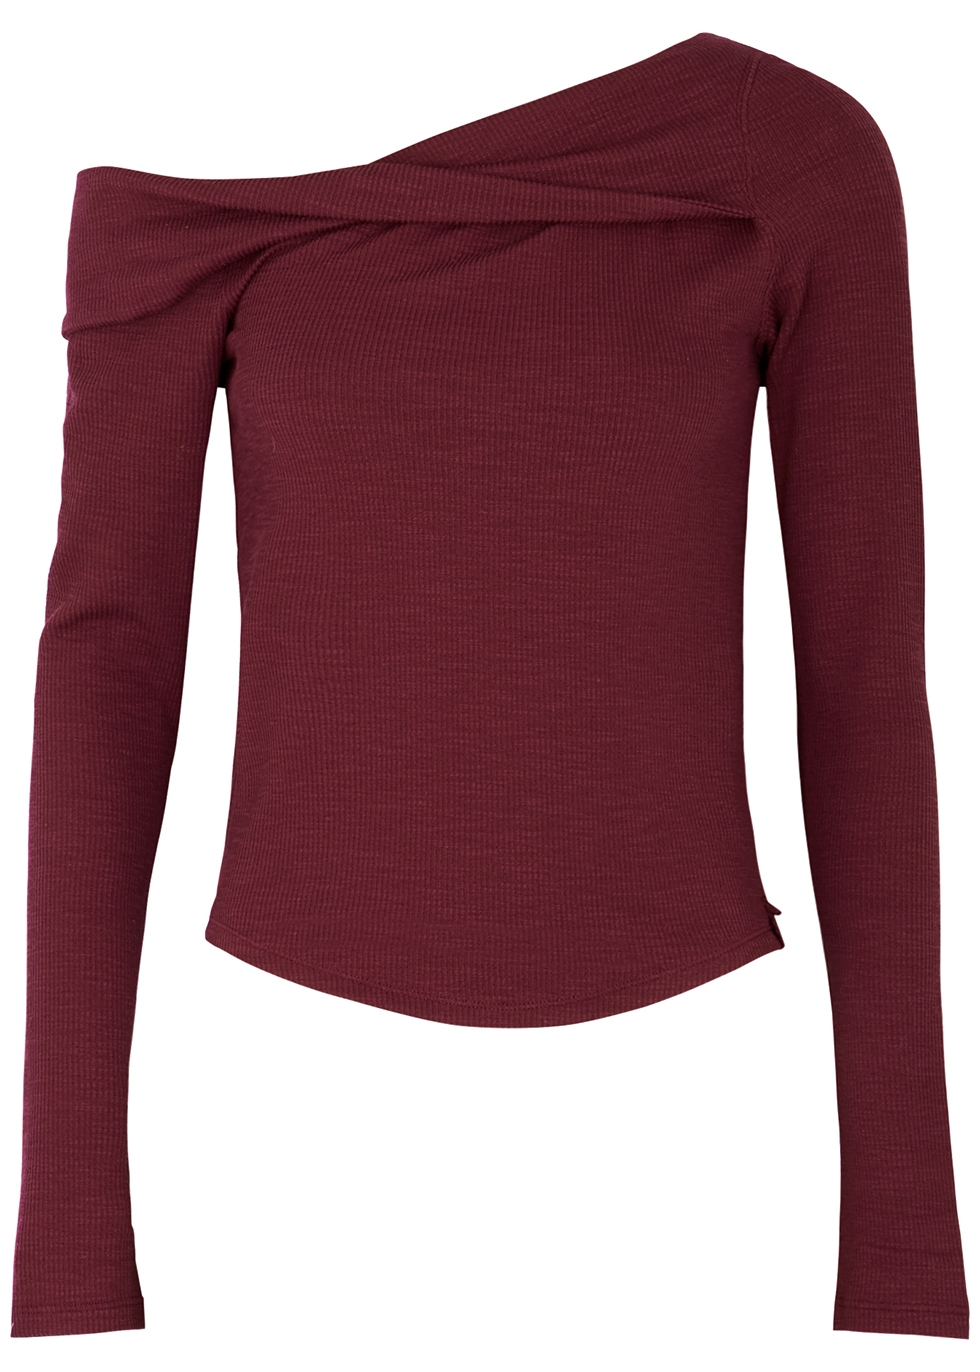 Free People Addie Layering red ribbed-knit top